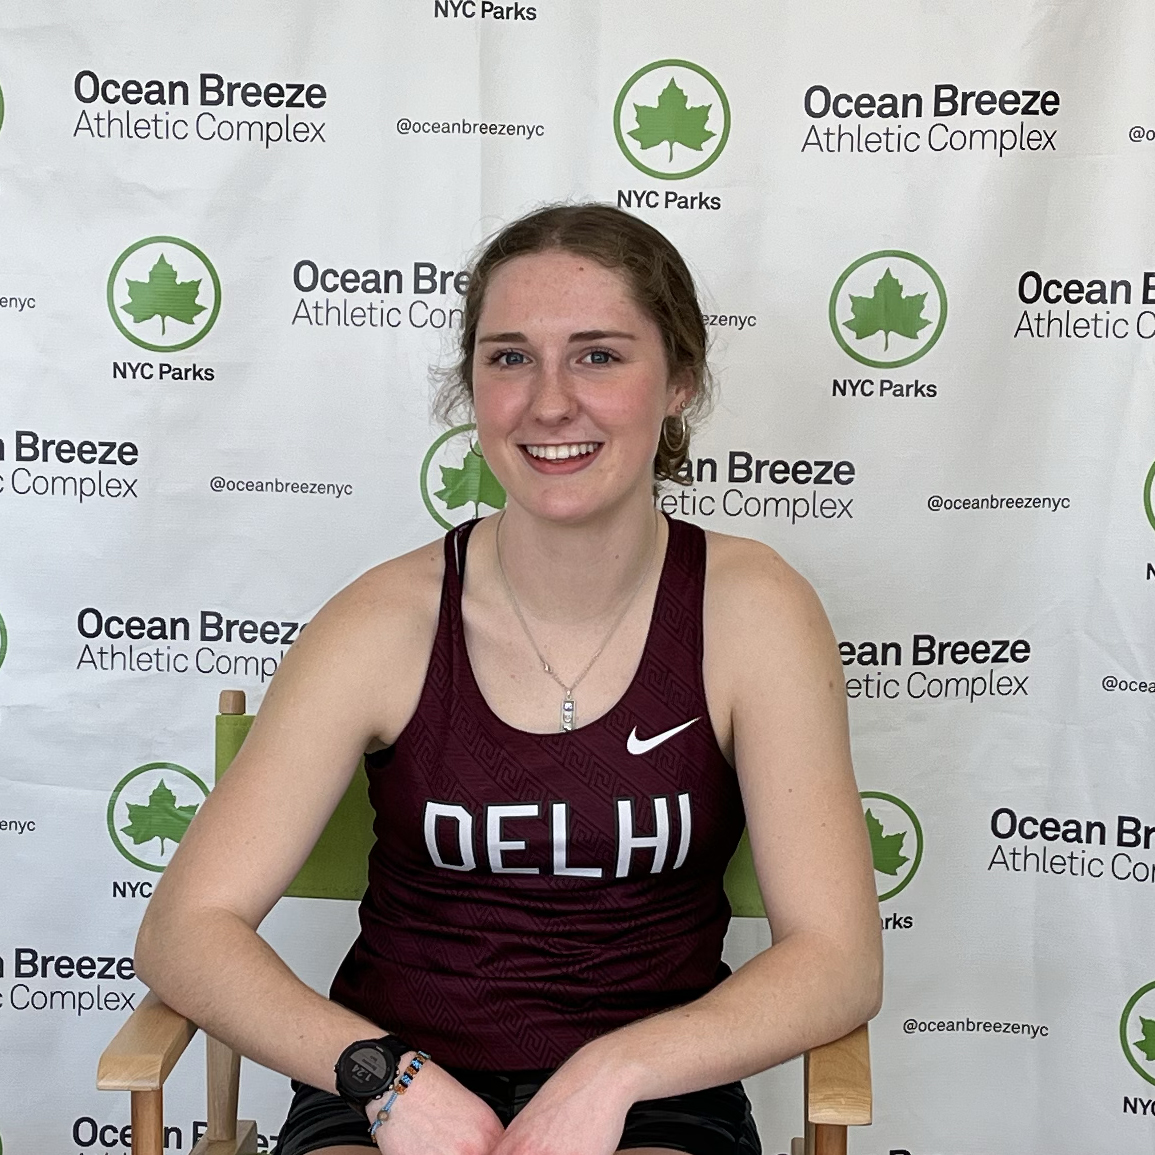 picture of Ellie Leers sitting in chair with Ocean Breeze Athletic Complex background